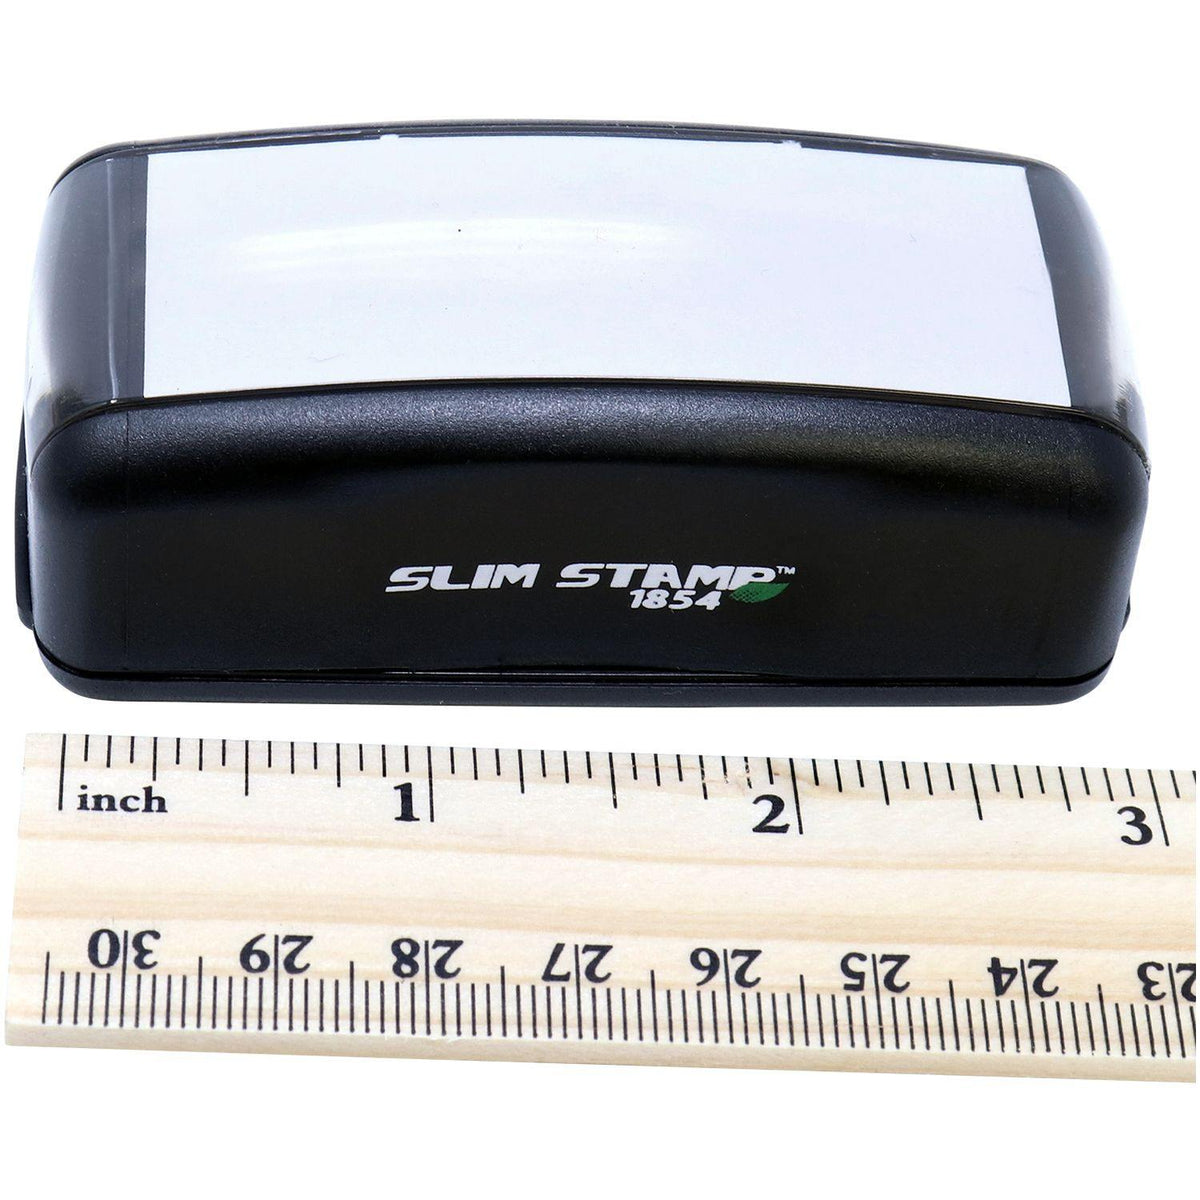 Measurement Large Pre-Inked Optima Confidential Stamp with Ruler